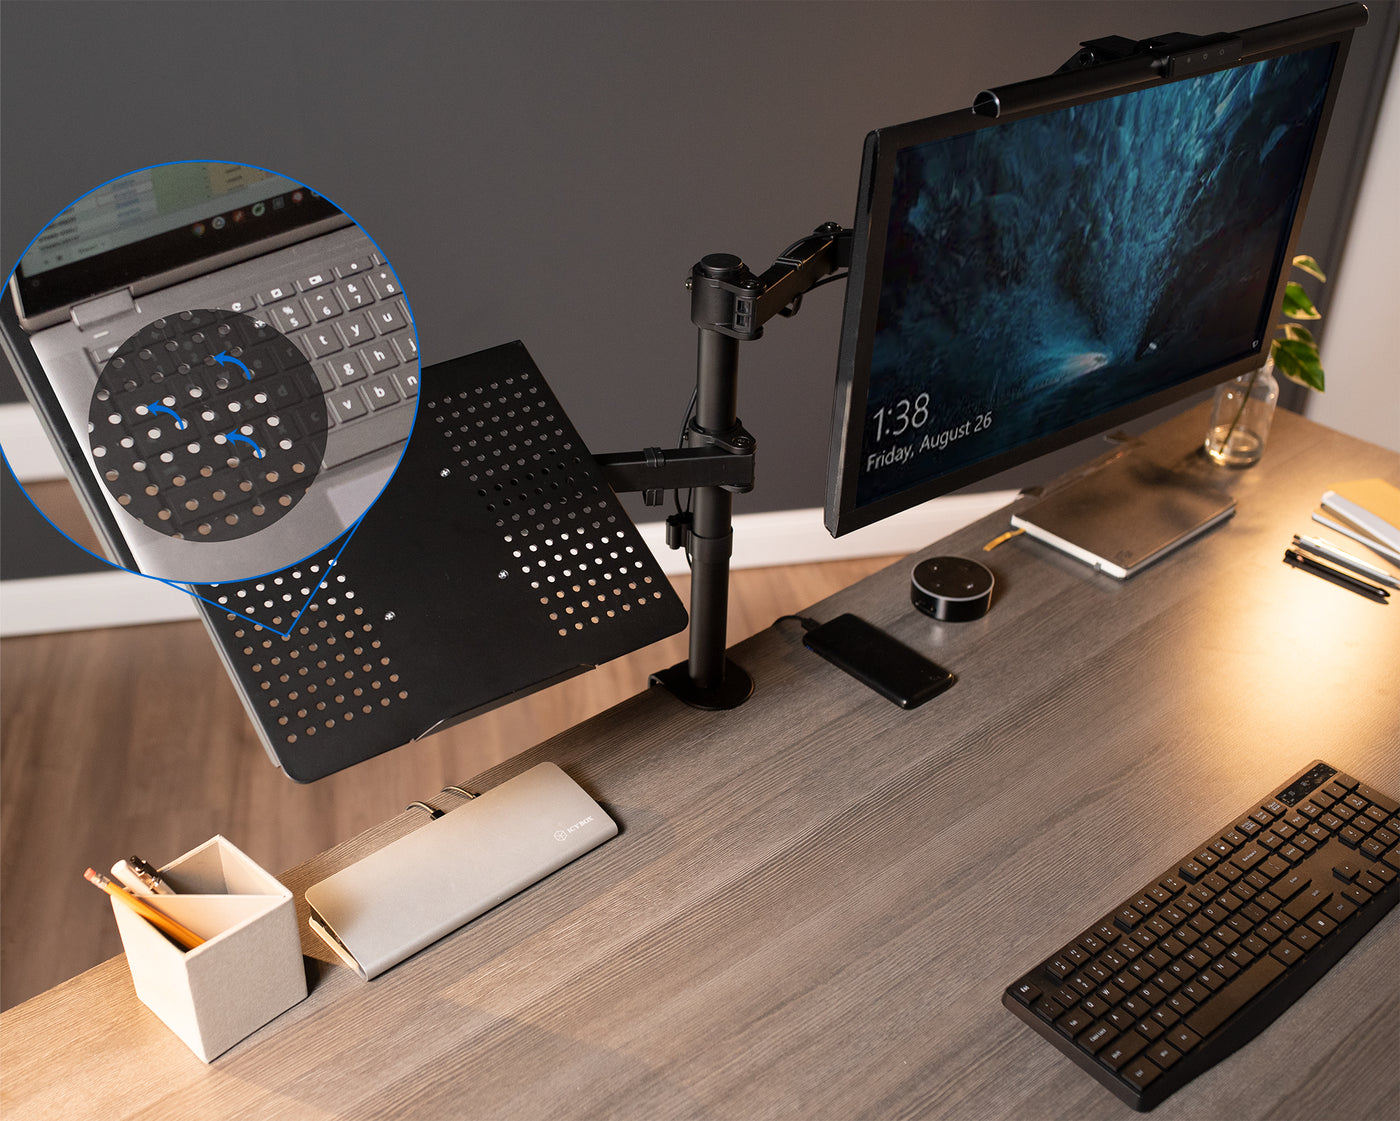 Fully adjustable single computer monitor and laptop desk mount allows you to display your laptop beside your monitor screen for ergonomic placement.